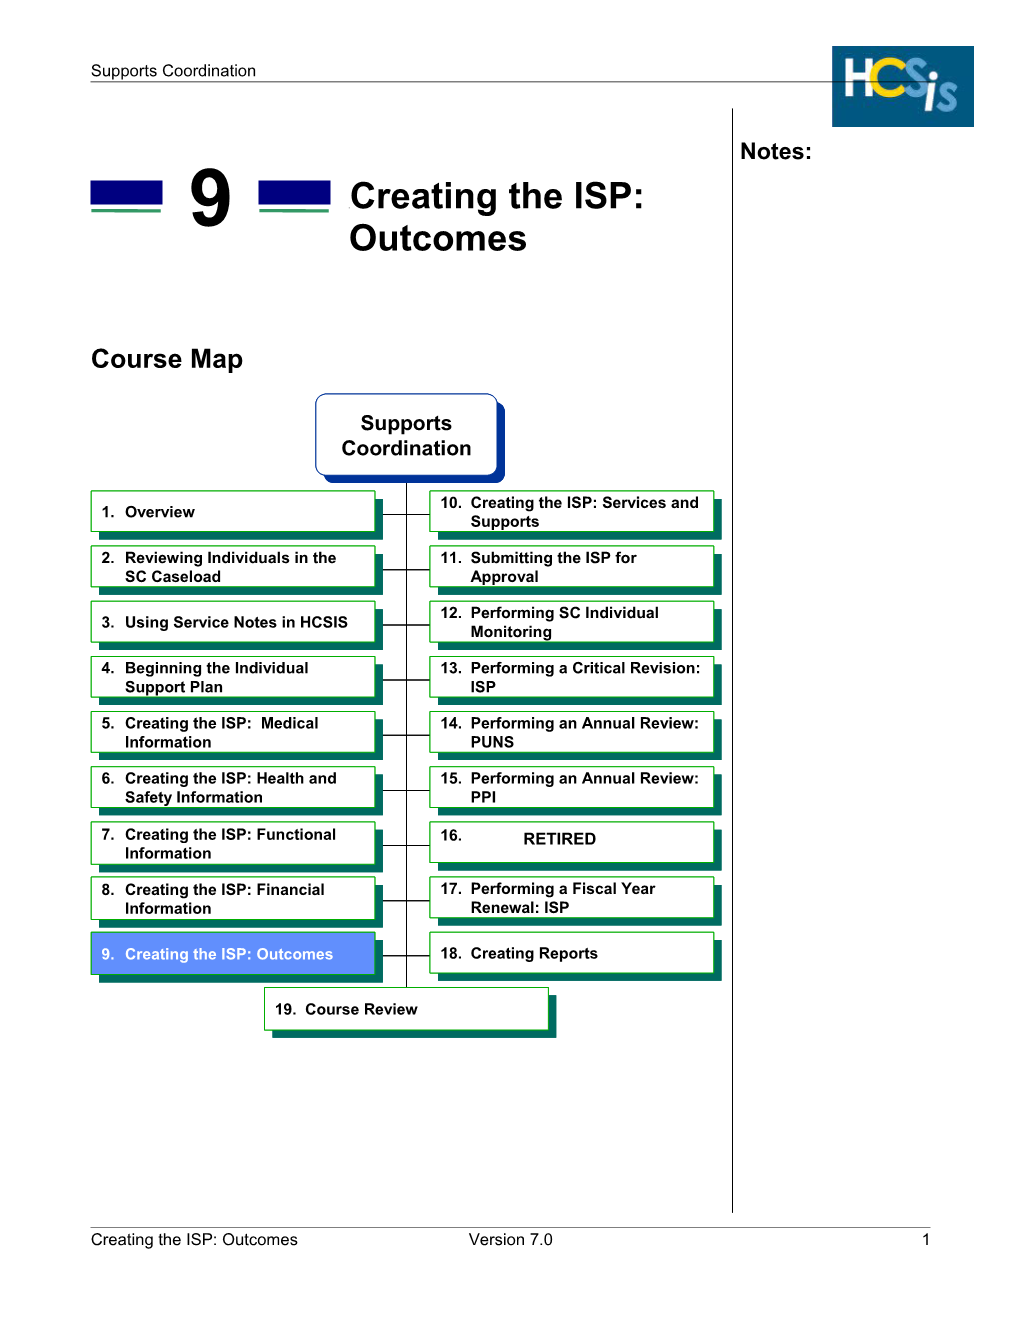 Creating the ISP: Outcomes